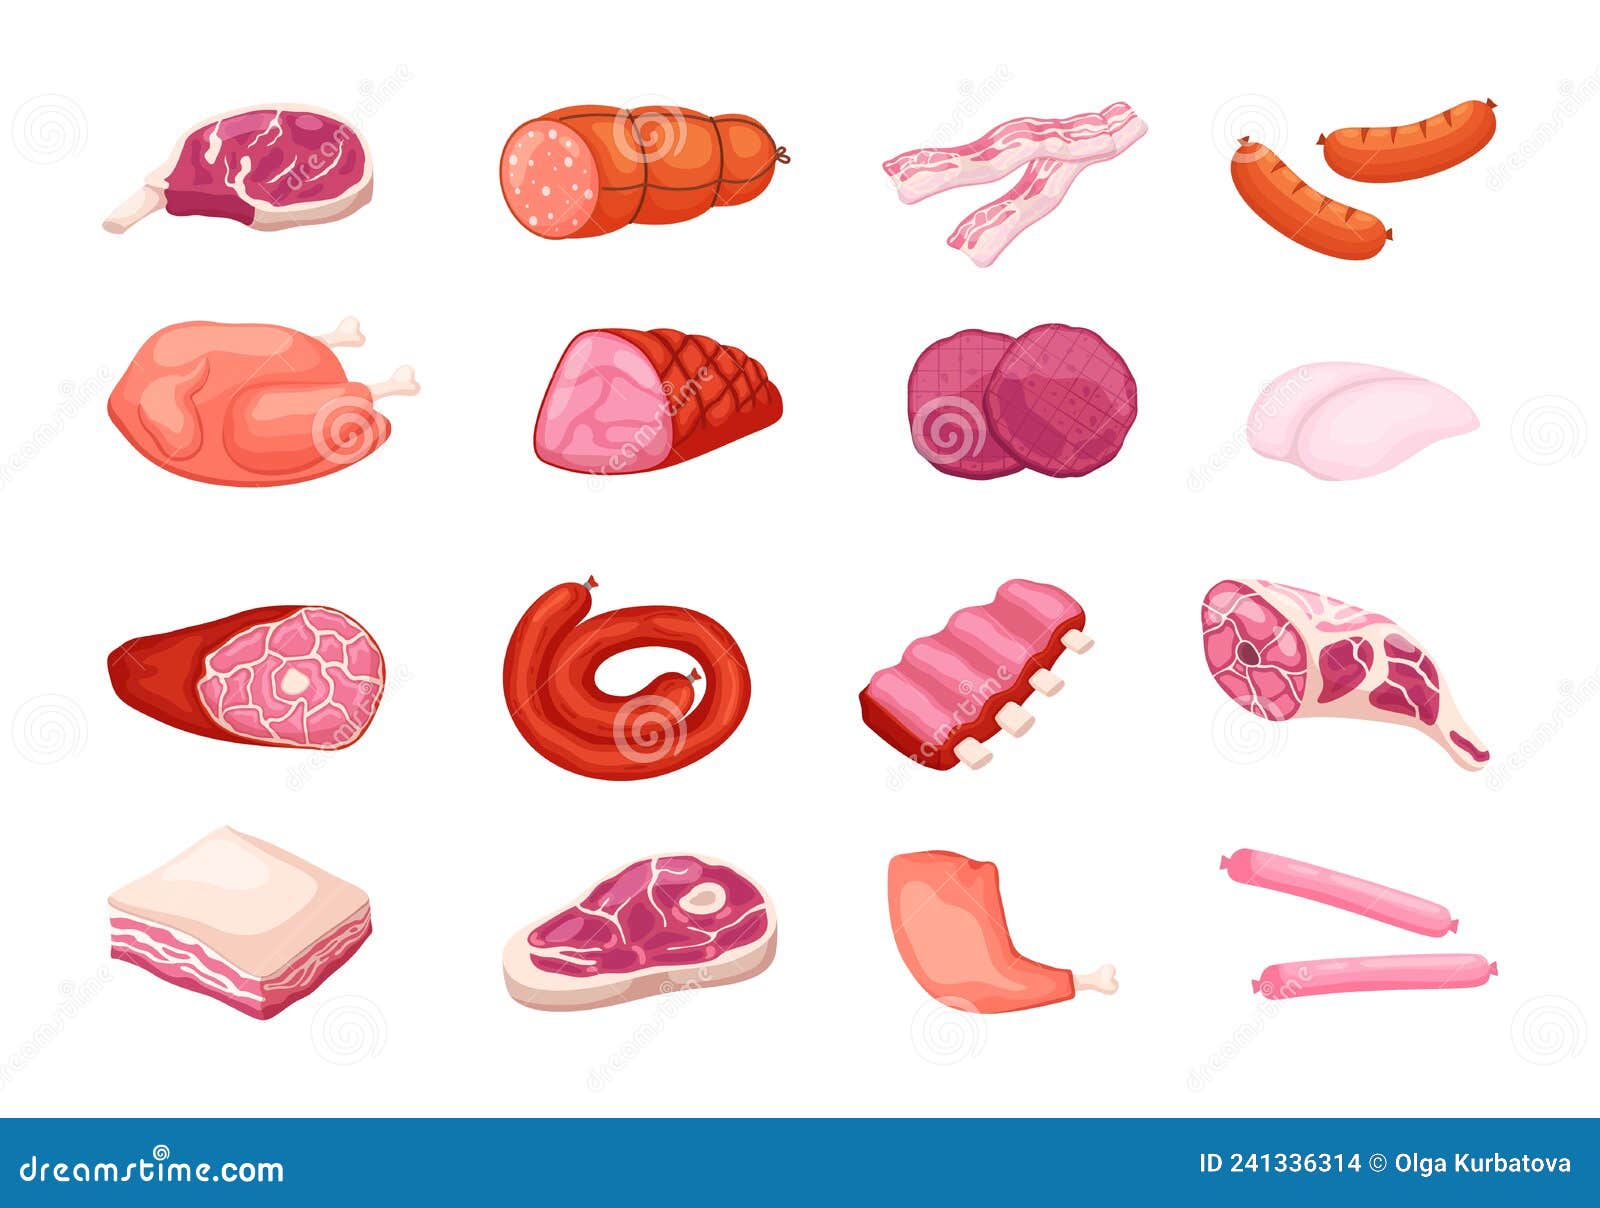 cartoon meat products. raw farm pork, beef steak, chicken and lamb, sausage, bacon and salami, different gastronomic